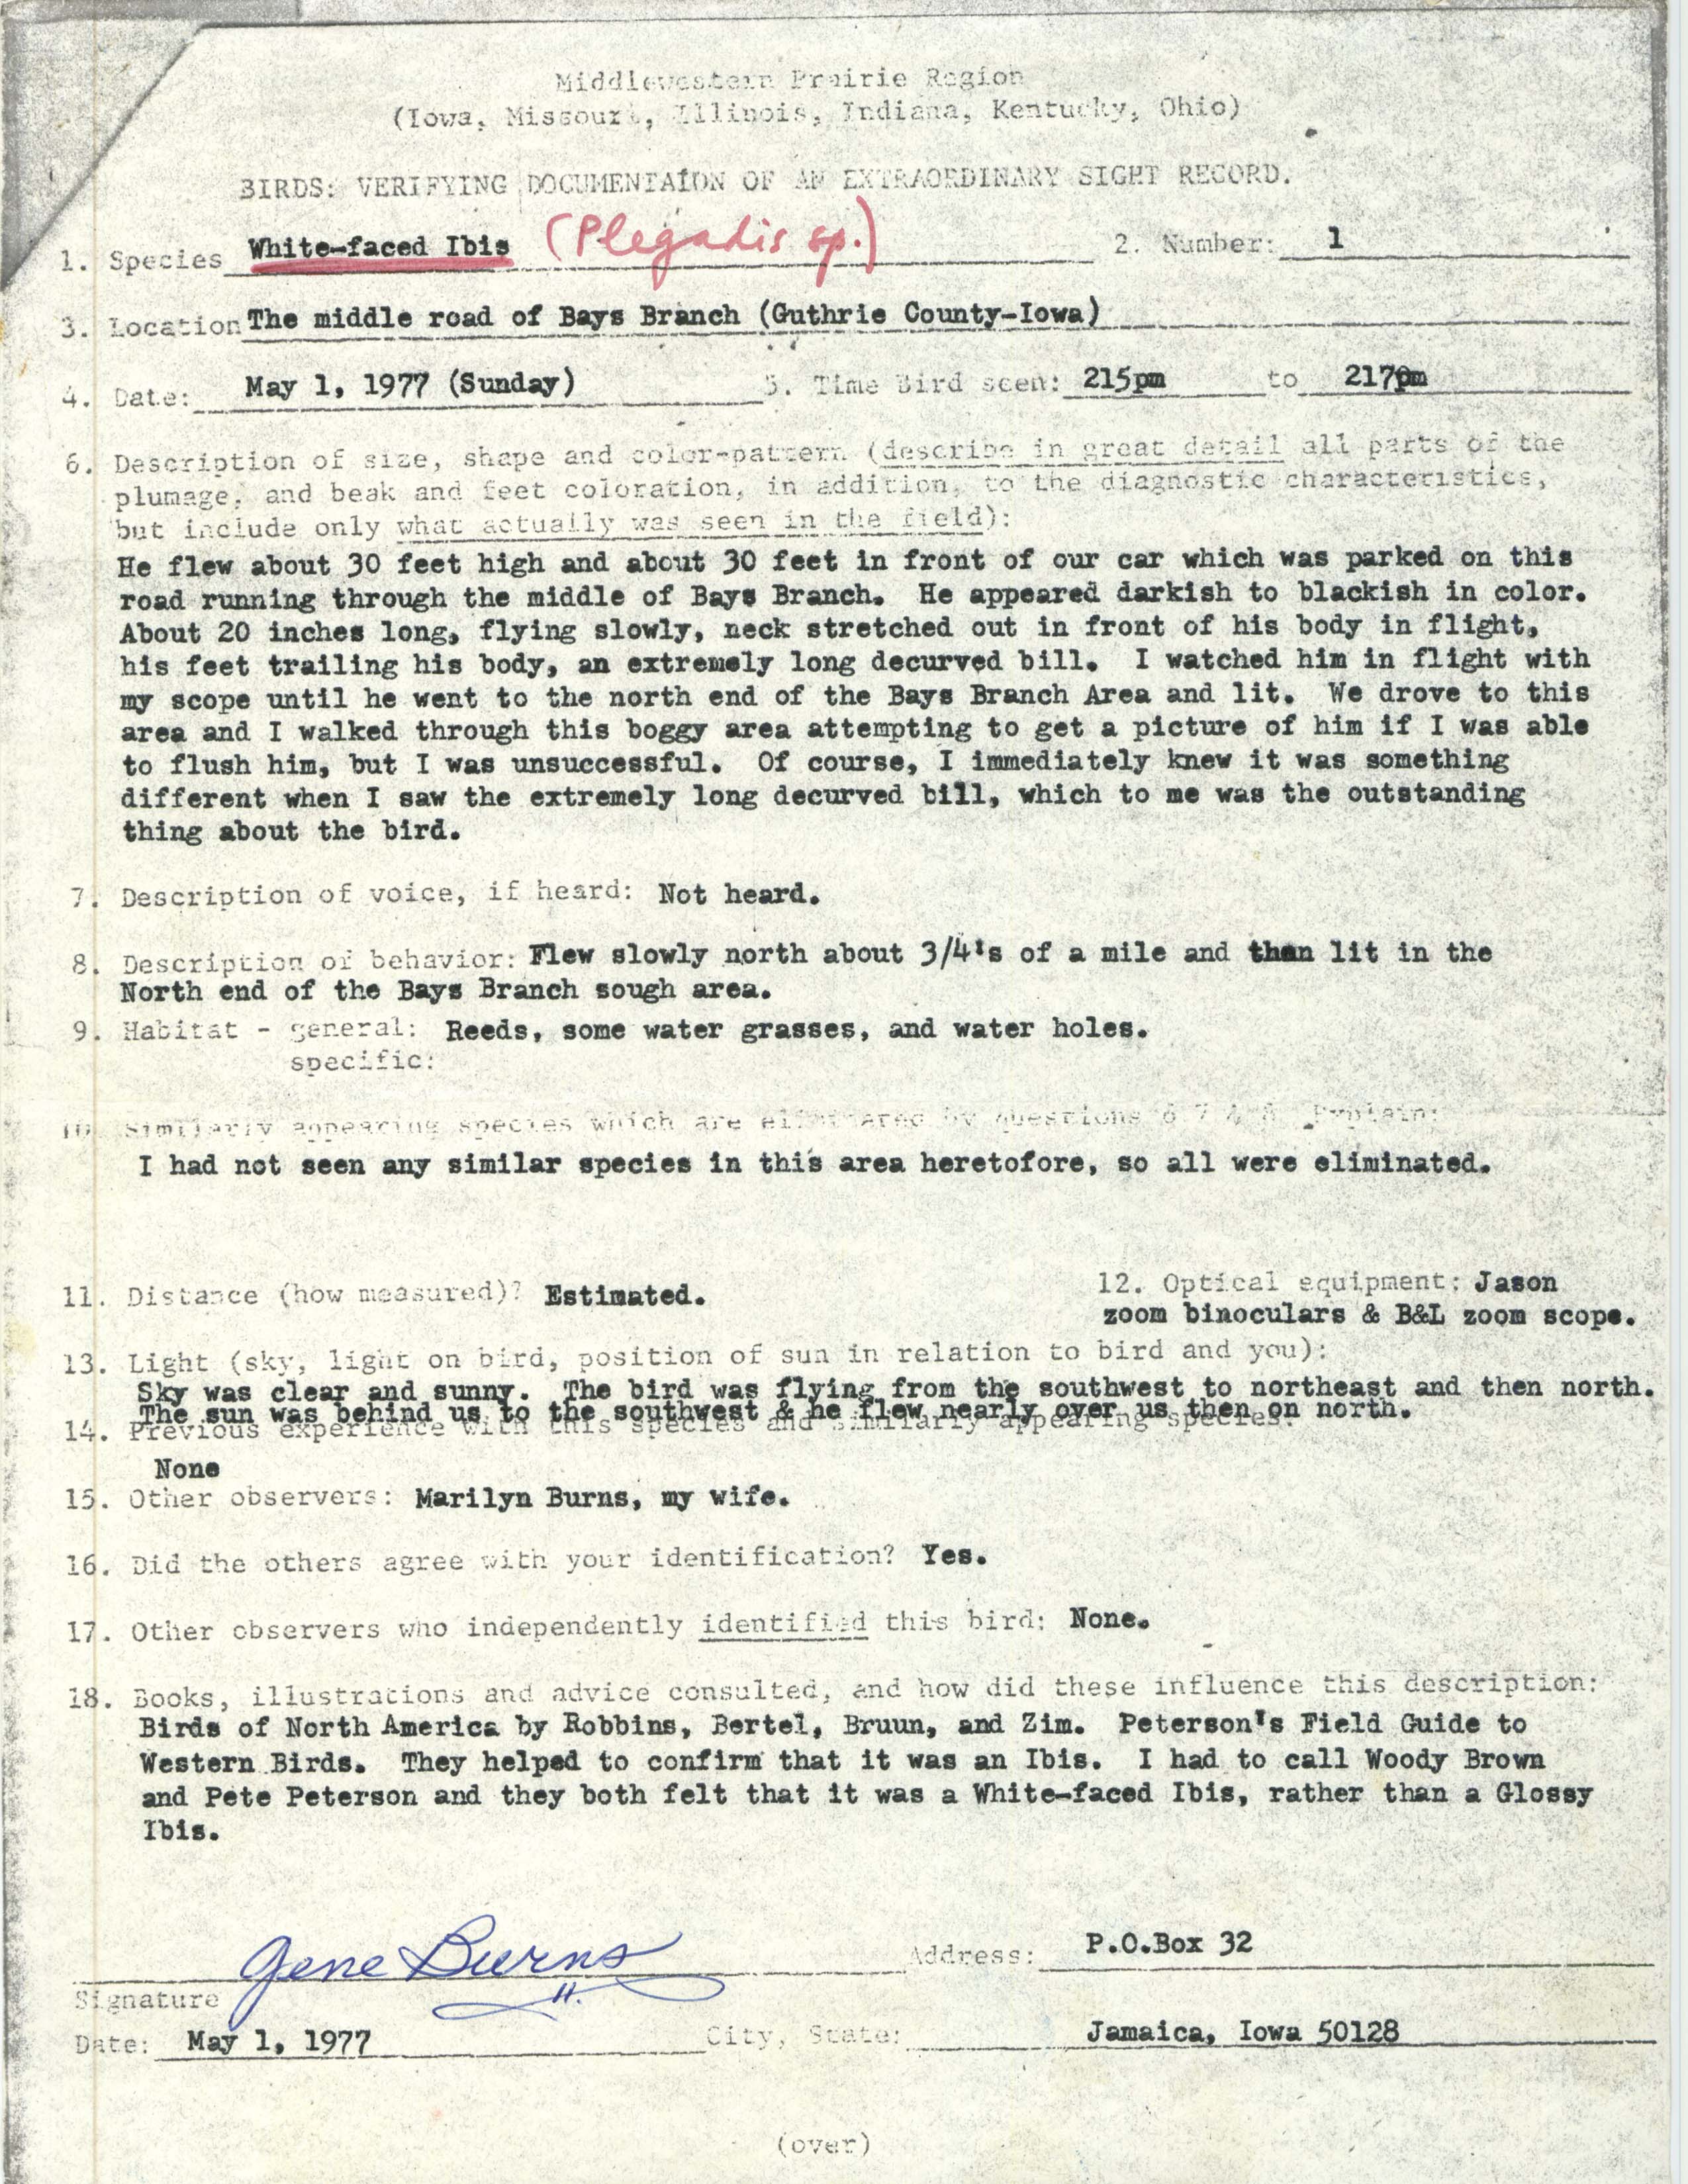 Rare bird documentation form for White-faced Ibis at Bays Branch, 1977